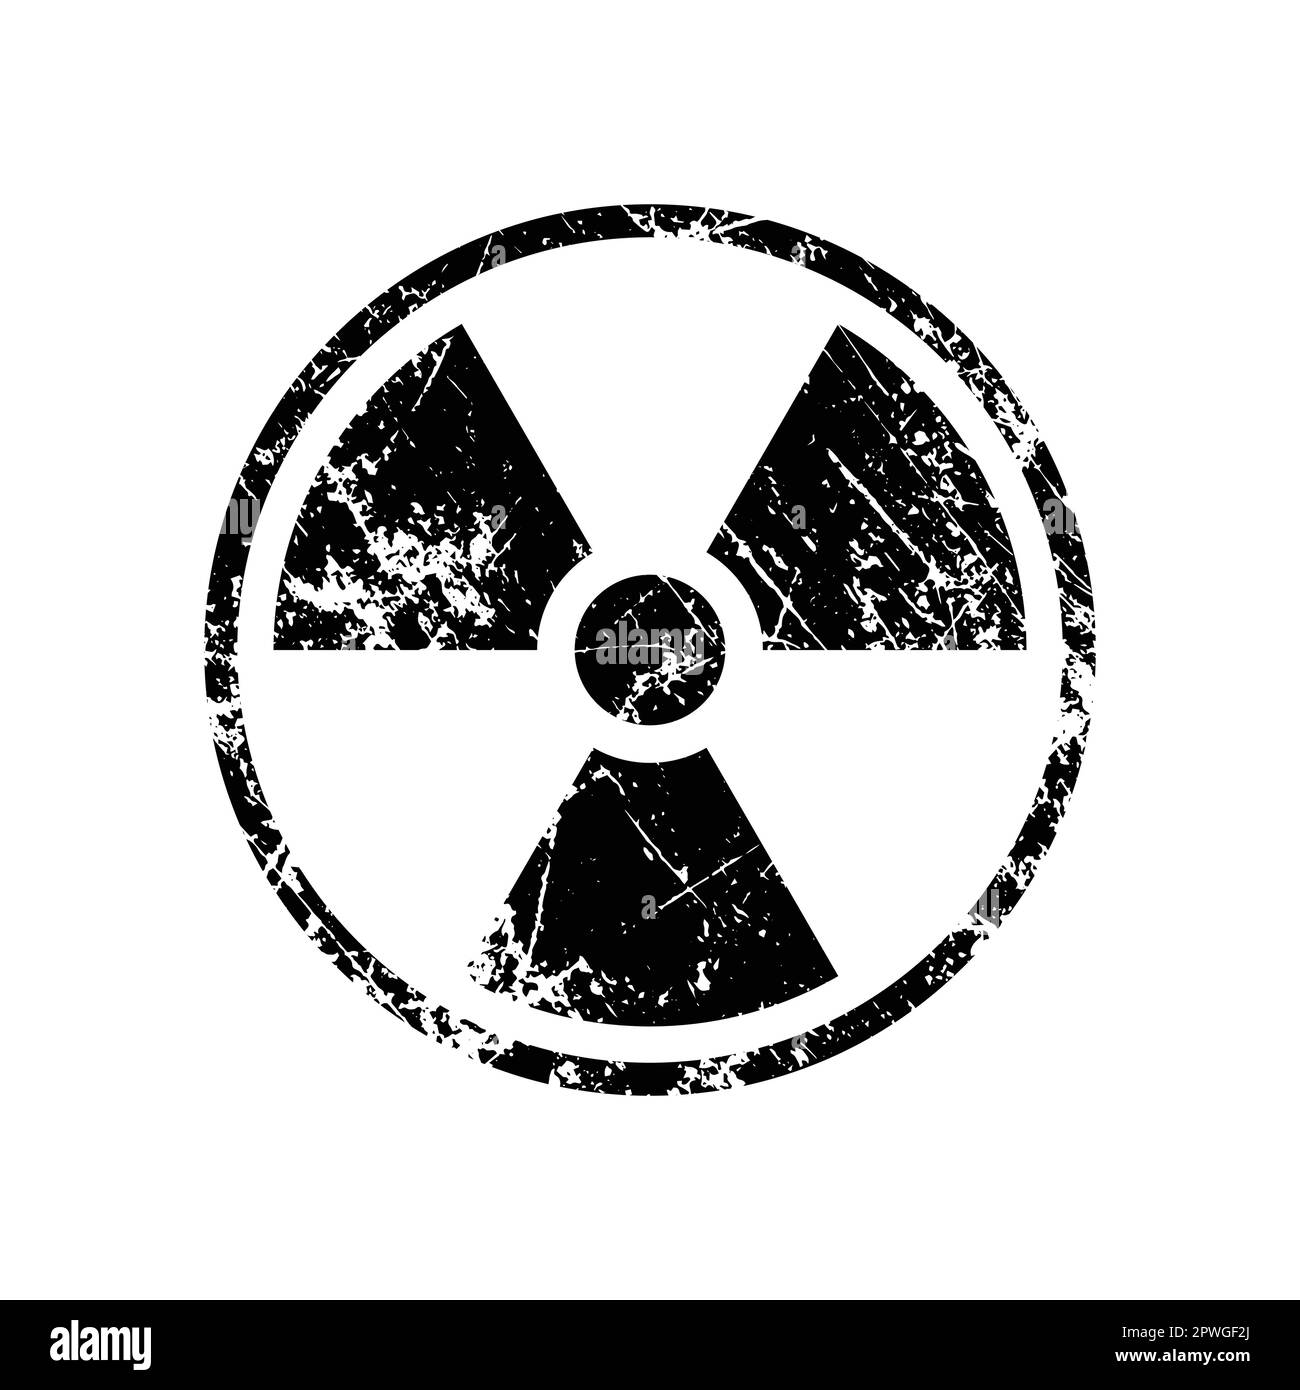 trefoil radiation radioactive nuclear warning symbol distressed grunge old circle classic vector isolated on white background Stock Vector